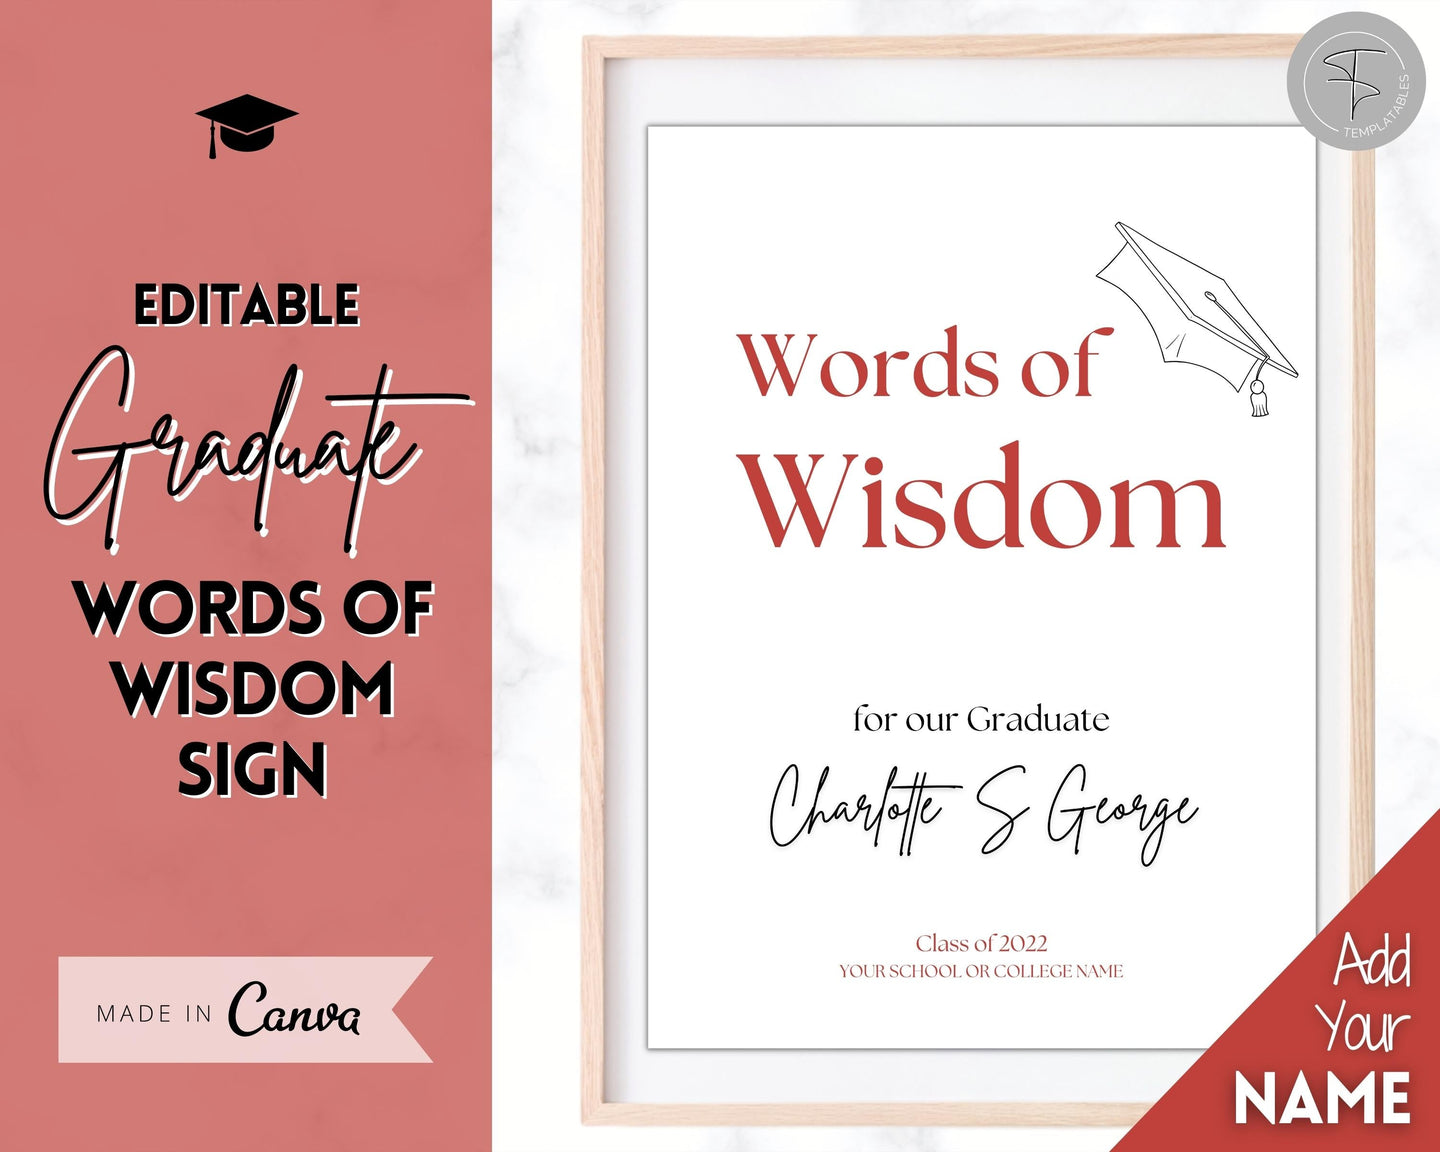 Words of Wisdom Graduation Party Sign, Editable Template, Graduate Advice Poster, College, High School Grad Sign, Class of 2022 Wishes | Red